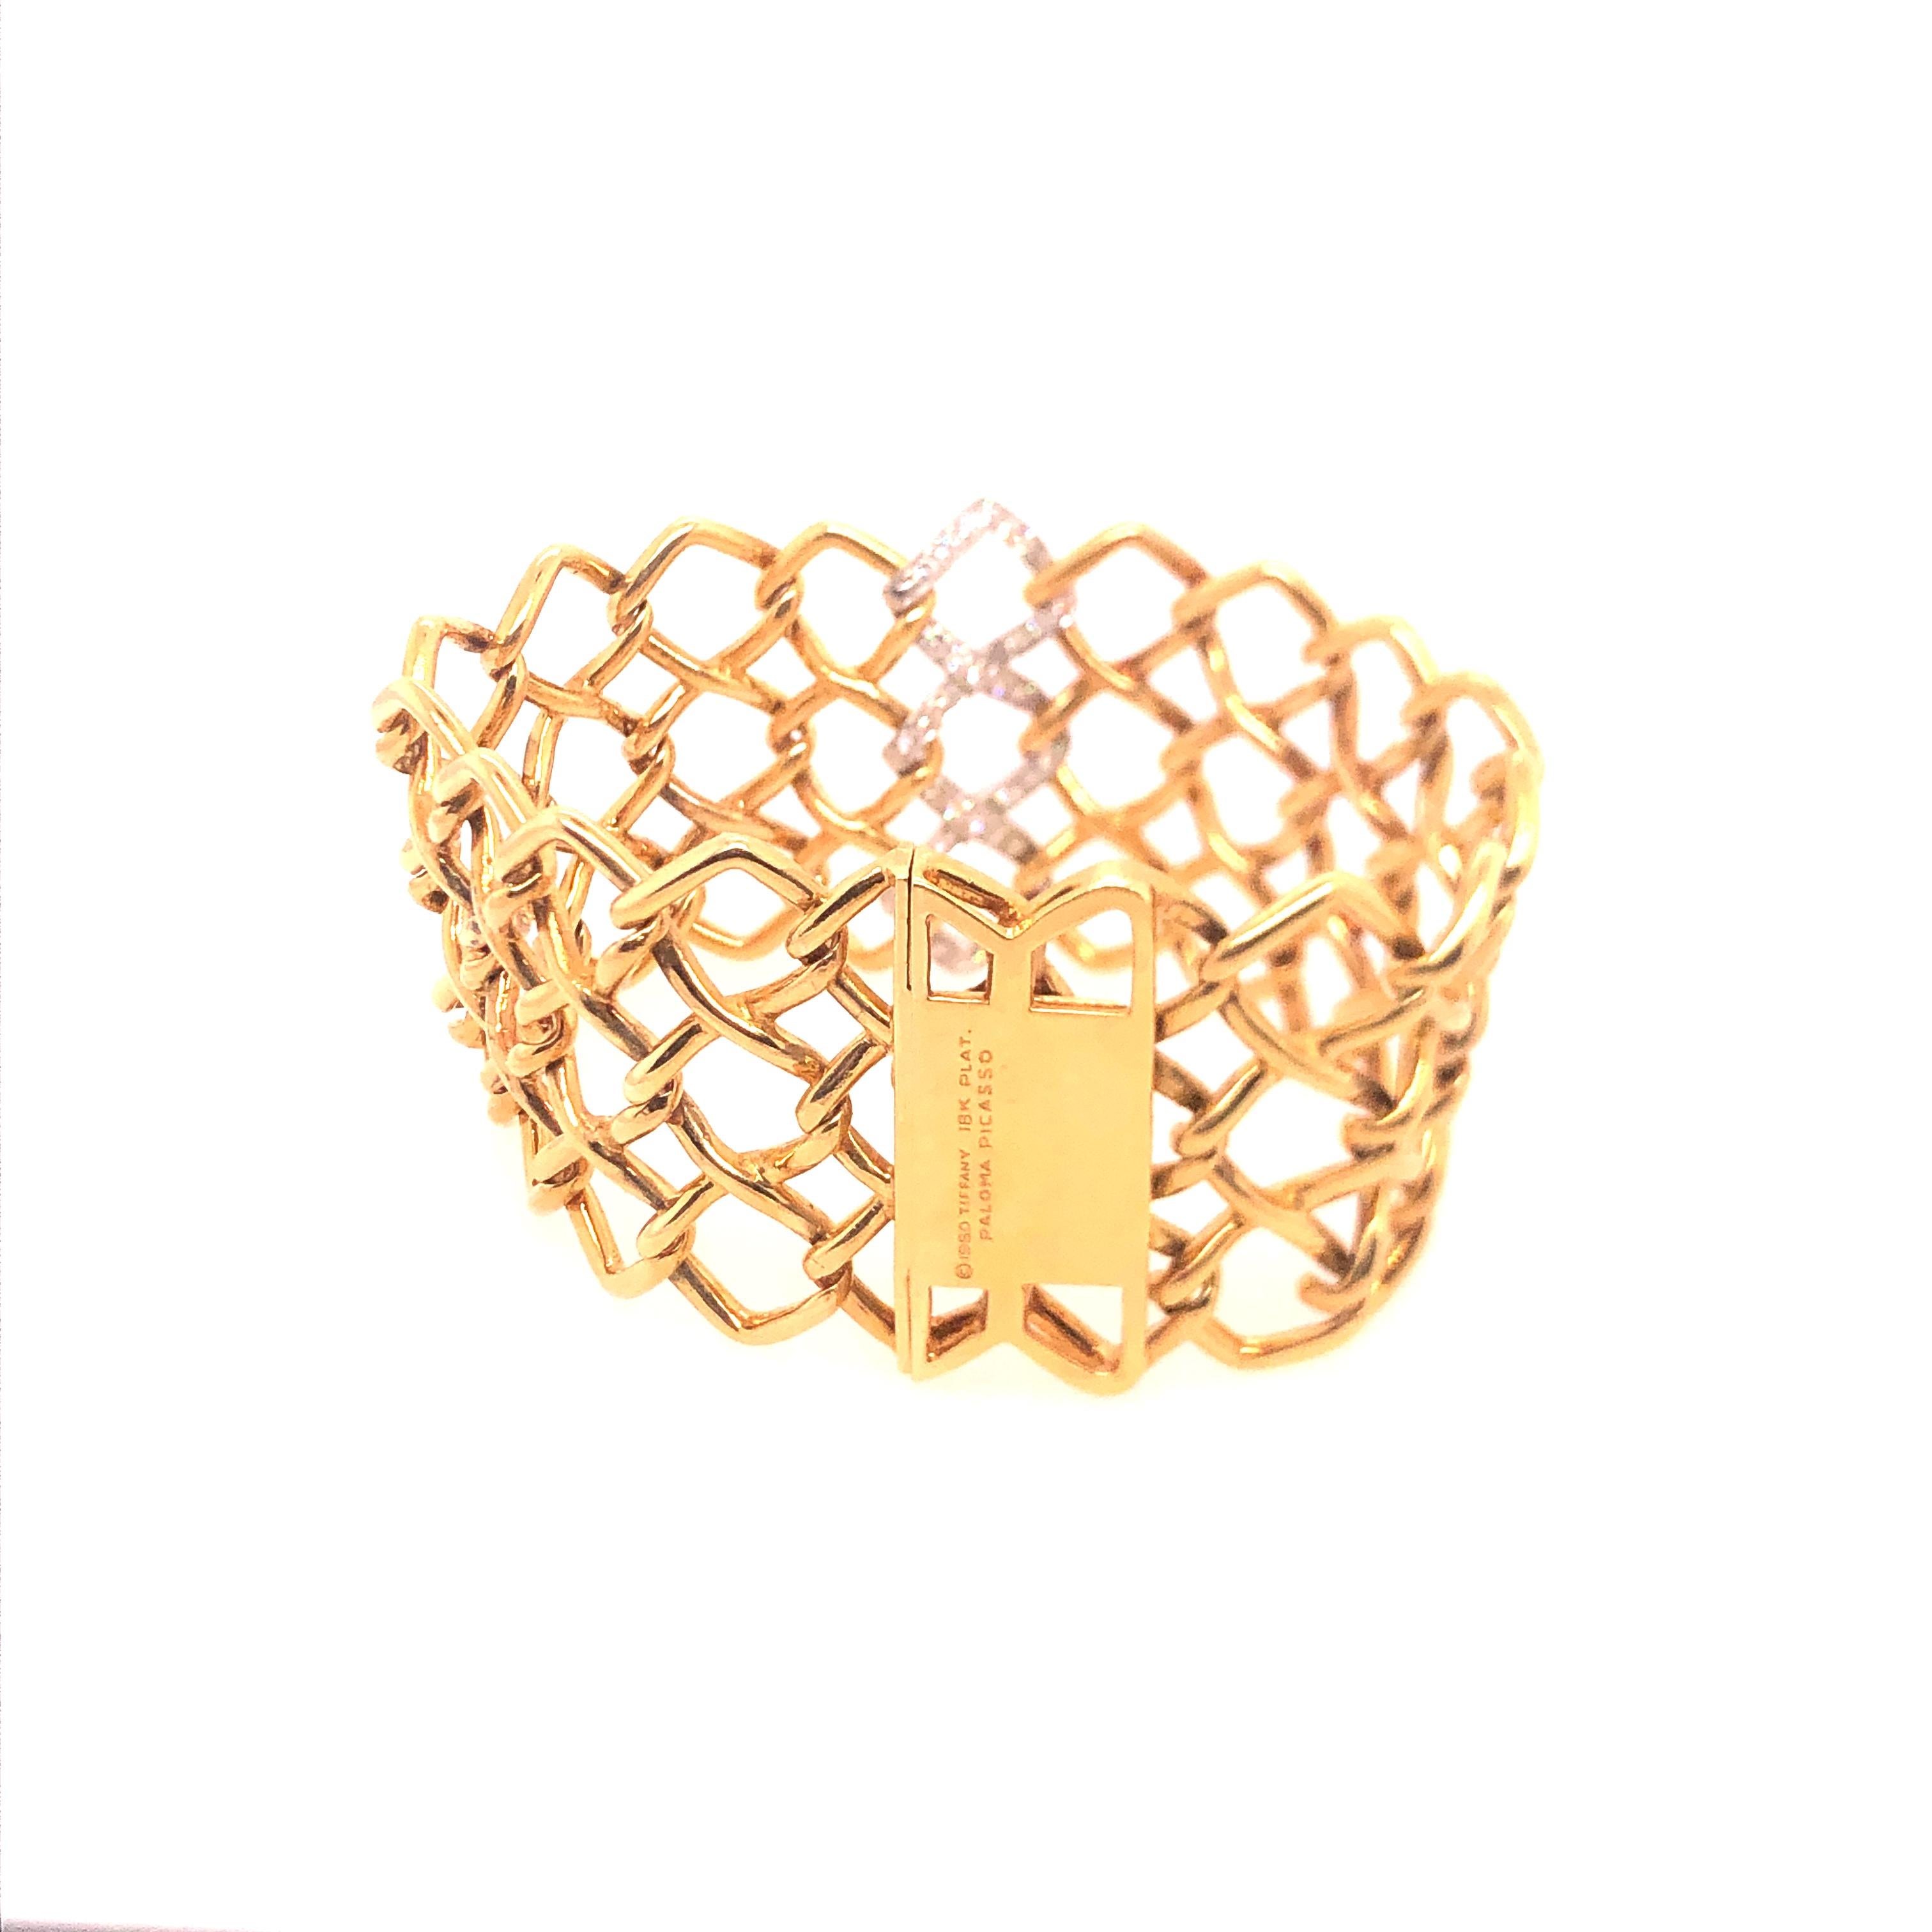 If you are looking for an unique and fetching piece, this yellow gold, platinum, and diamond bracelet designed by Paloma Picasso for Tiffany & Co. is for you. 
It features three rows of diamond-shaped links with the vertical center links in platinum